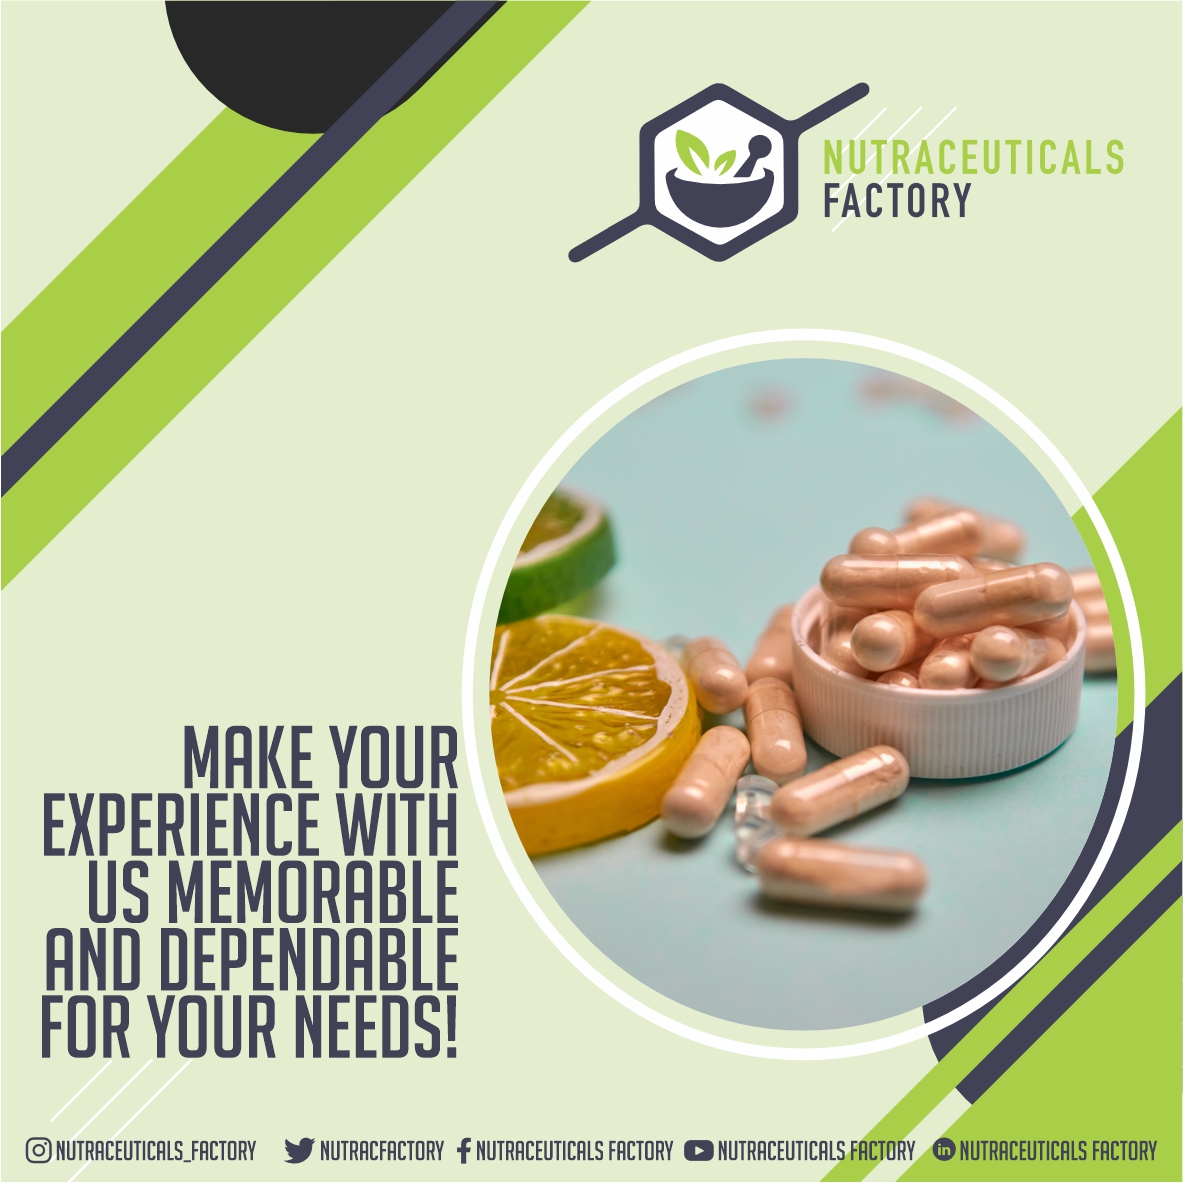 At our company, as a client, you'll experience swift and efficient service provided by a highly professional and attentive team. 

#NutraceuticalsFactory #Nutraceuticals #USA #Florida #PrivateLabeling #ProductDevelopment #Manufacturing #PrivateLabelNutraceuticals 🏭